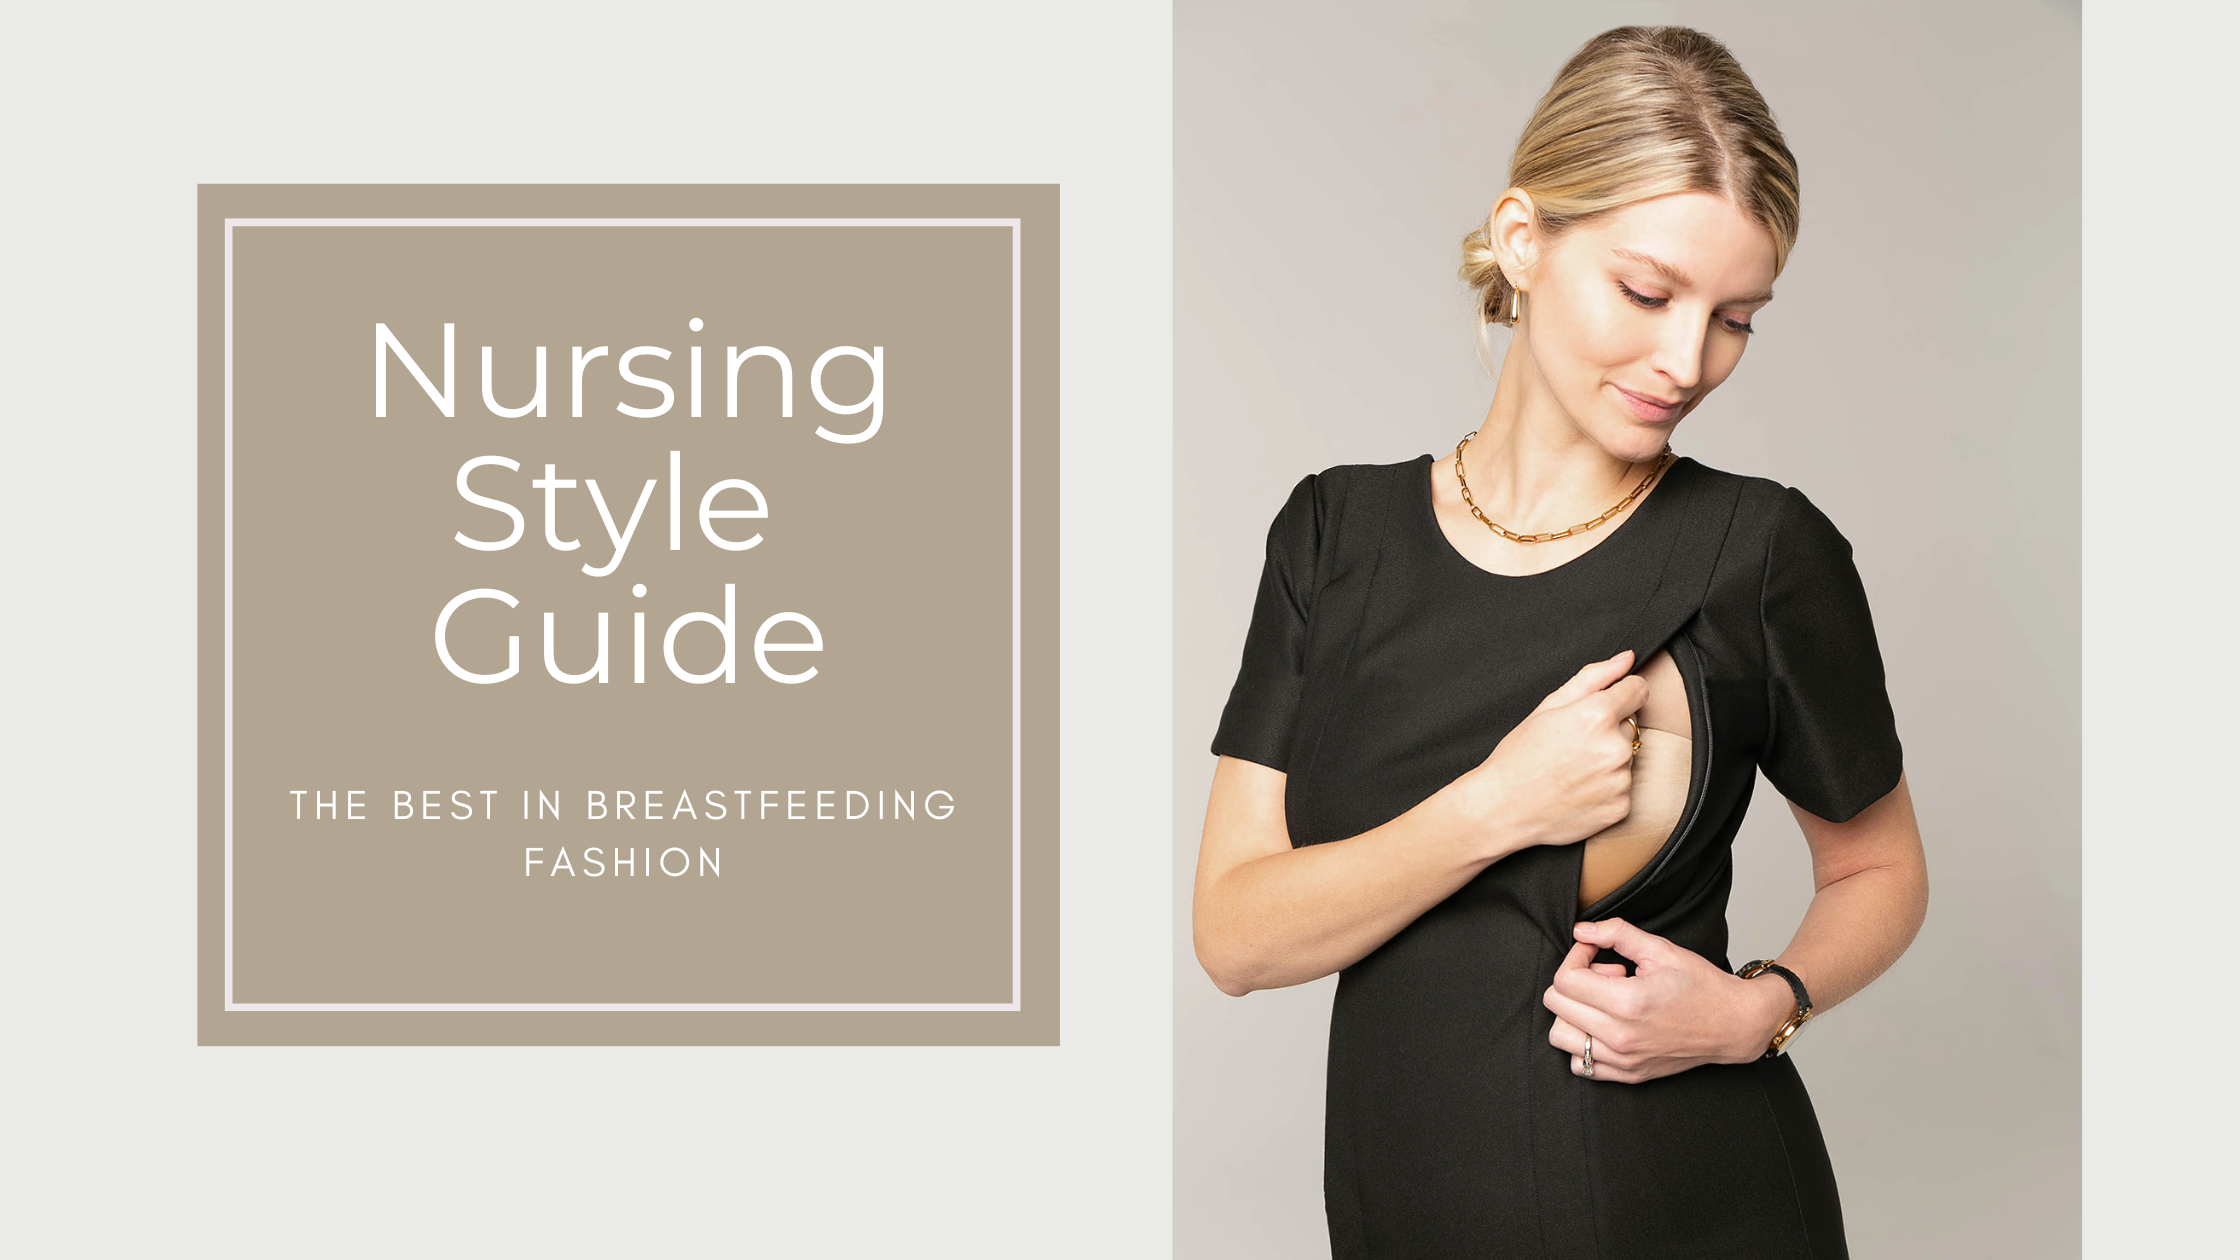 Nursing Friendly Clothes and Outfits to Breastfeed In